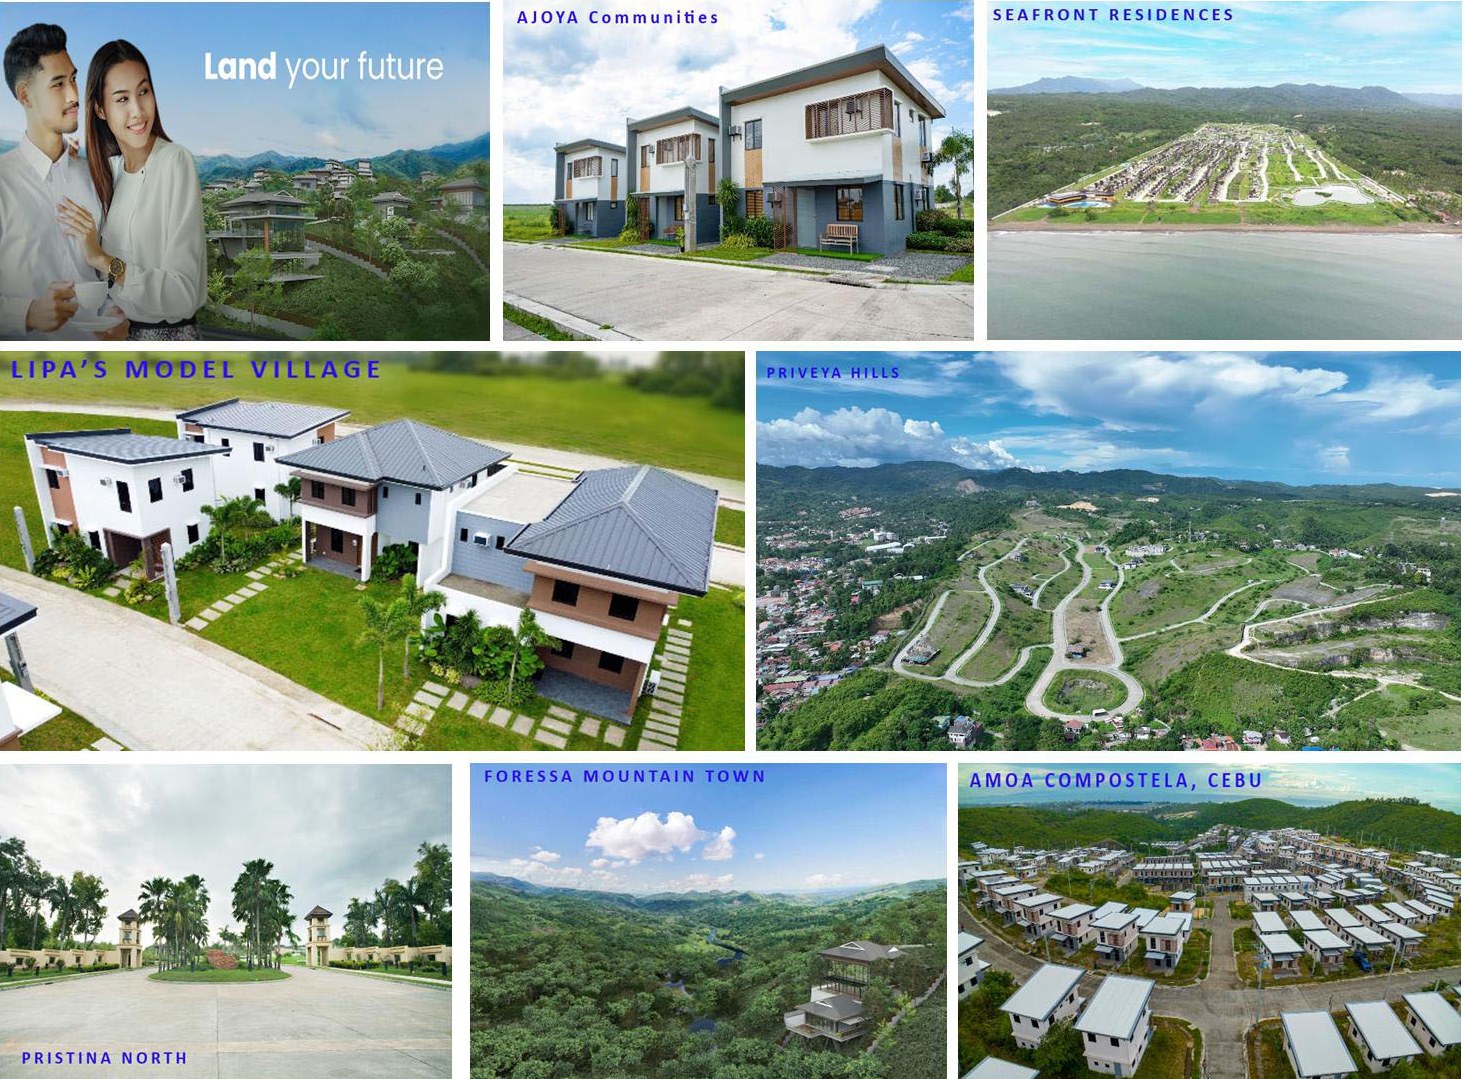 Land your future in residential lots